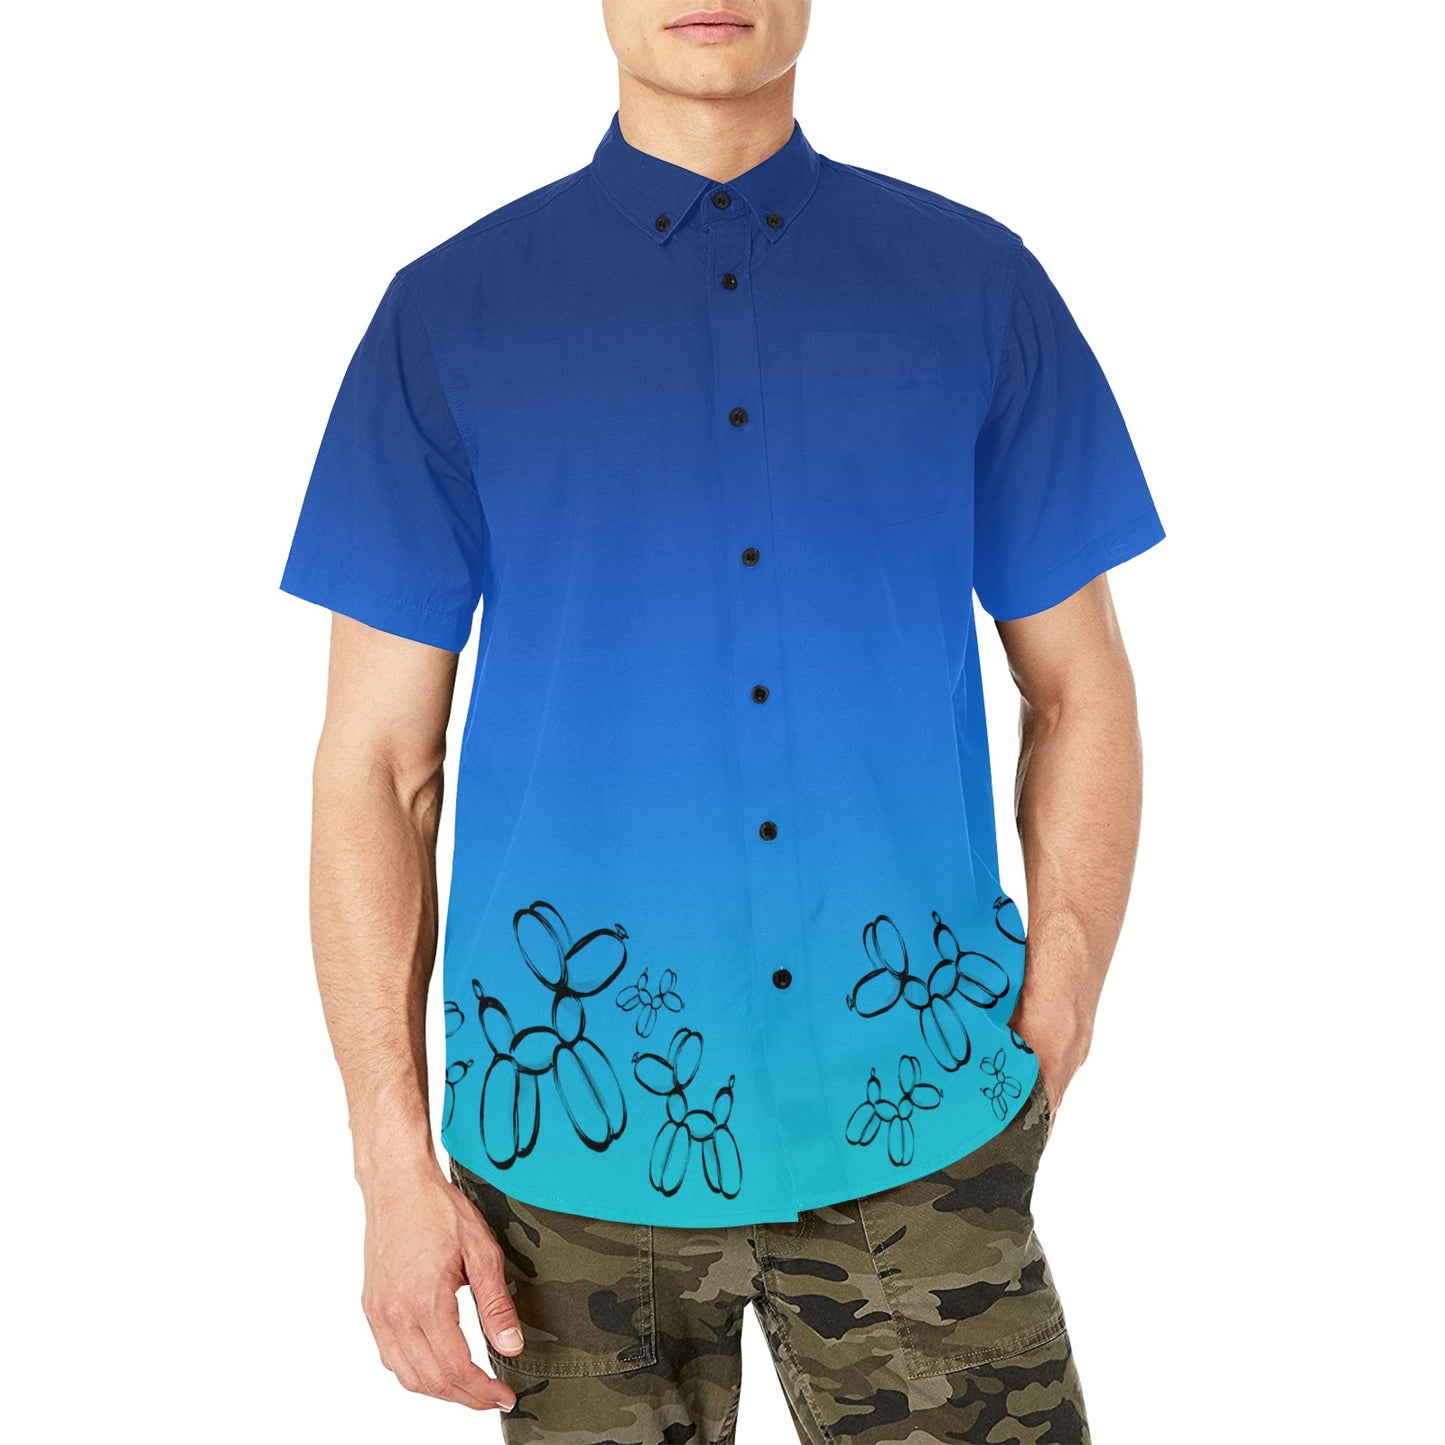 Blue balloon twisting shirt with balloon dogs